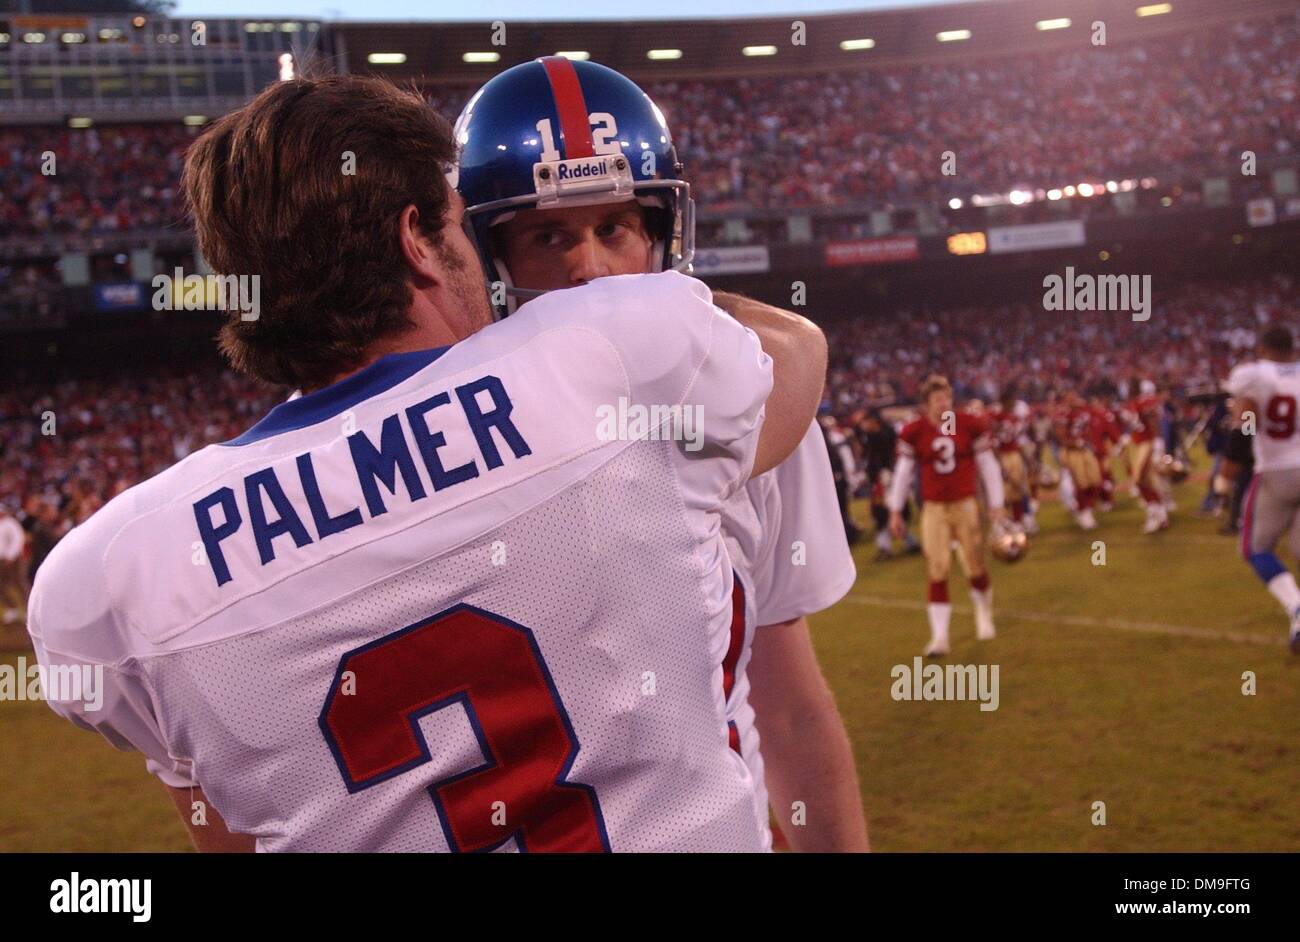 Giants placeholder Matt Allen is consoled at the end of the game by QB Jesse Palmer after Allen fumbled the field goal snap to lose the game in the NFC Wild Card Game between the San Francisco 49ers and the New York Giants, Sunday January 5, 2003 at Candlestick Park. Sacramento Bee photograph by Hector Amezcua./ZUMA Press Stock Photo